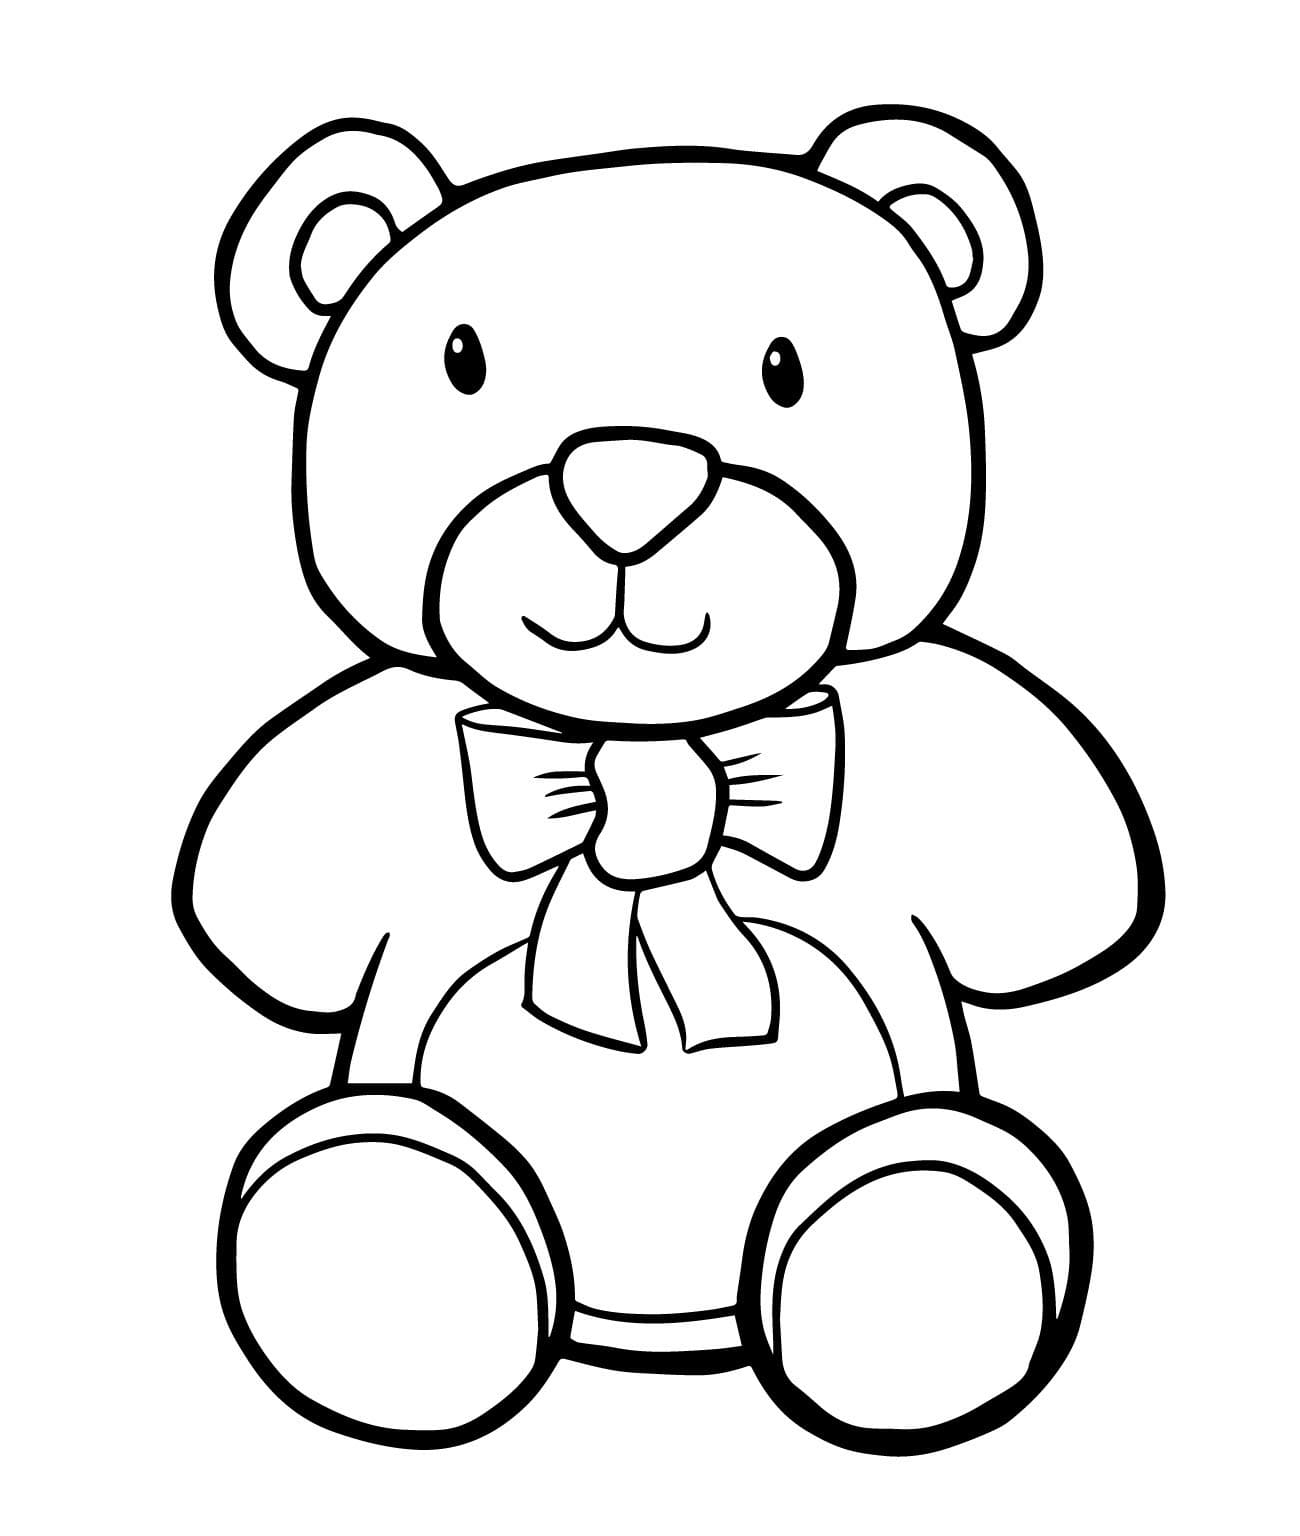 great-teddy-bear-coloring-page-download-print-or-color-online-for-free